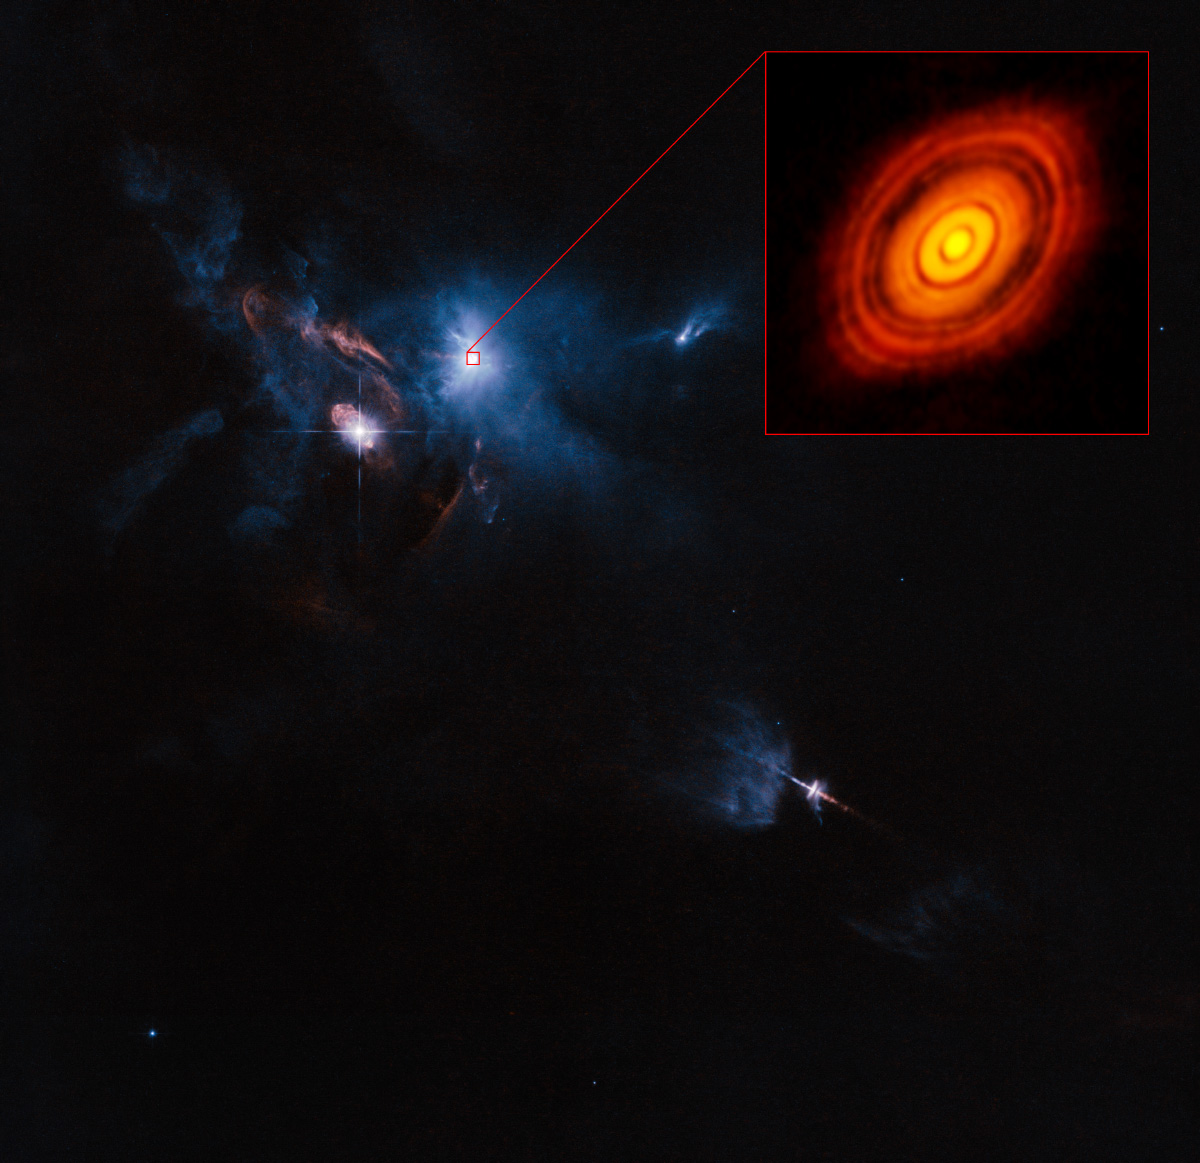 Revolutionary Photo Clearly Shows Star System Forming For The First Time